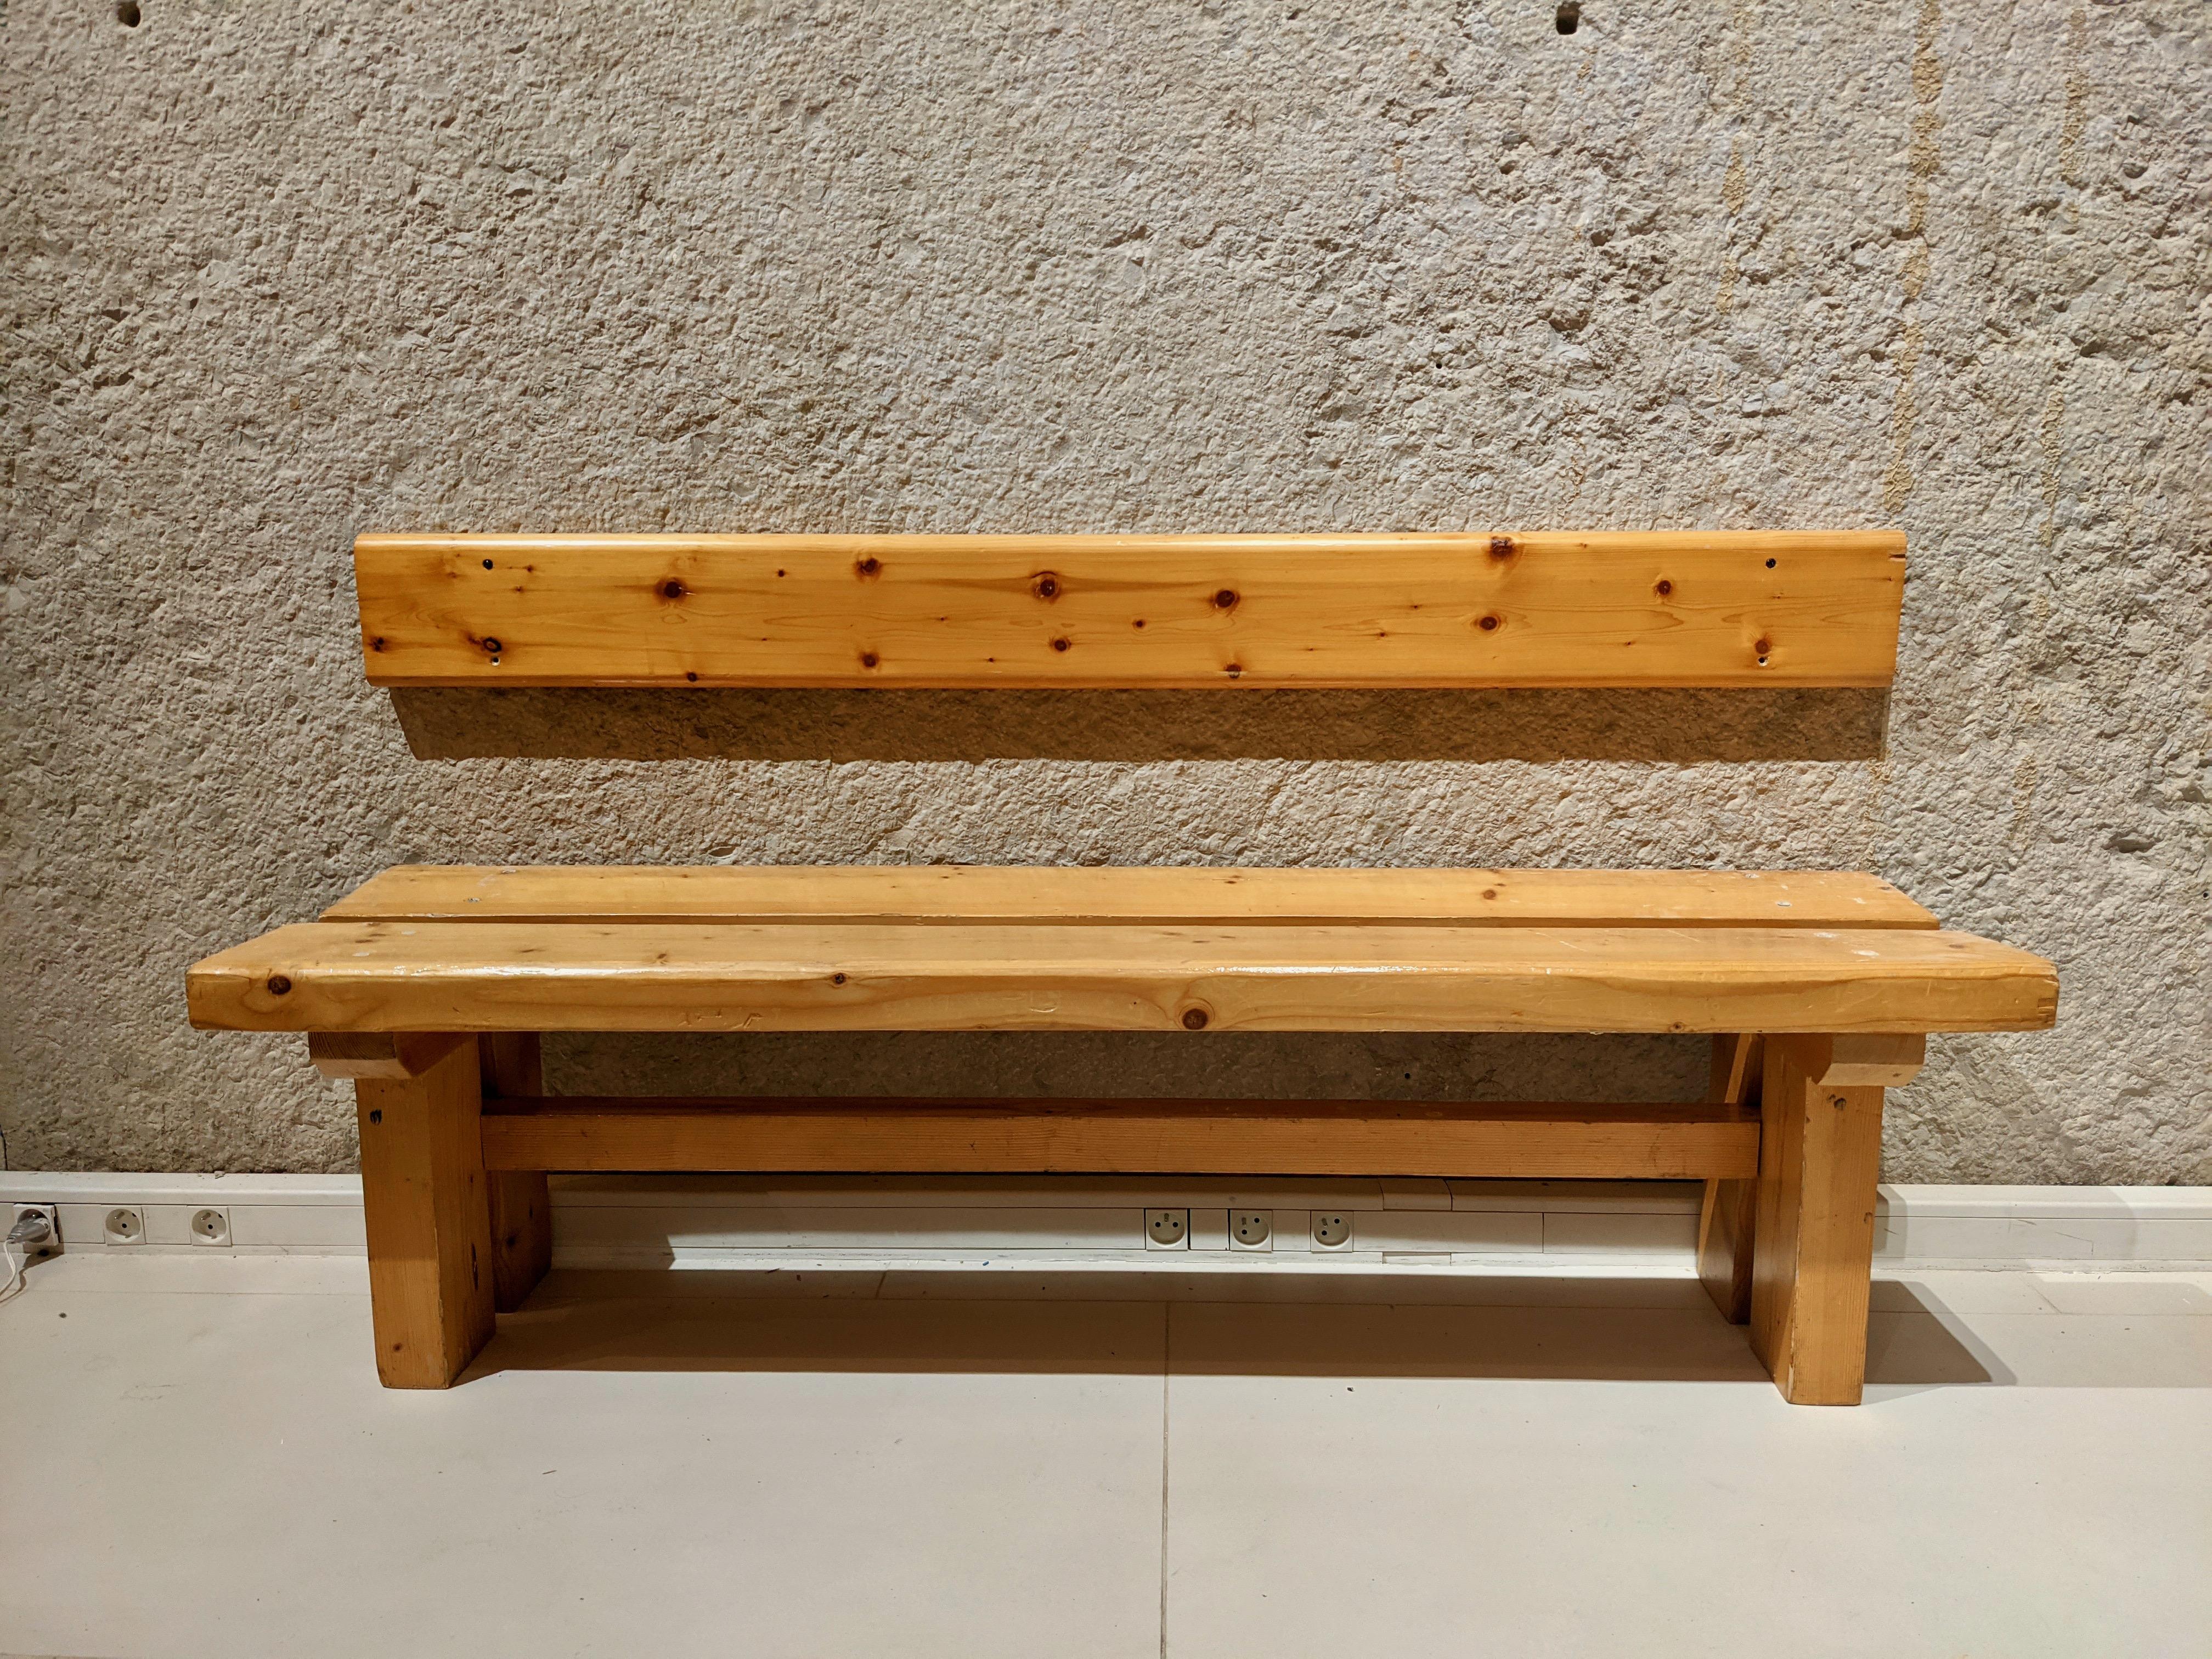 Bench and backsplash by Charlotte Perriand for les Arcs. Pine wood. Very good condition. Circa 1970
Dimensions : W158 cm x H43 cm x D45 cm.